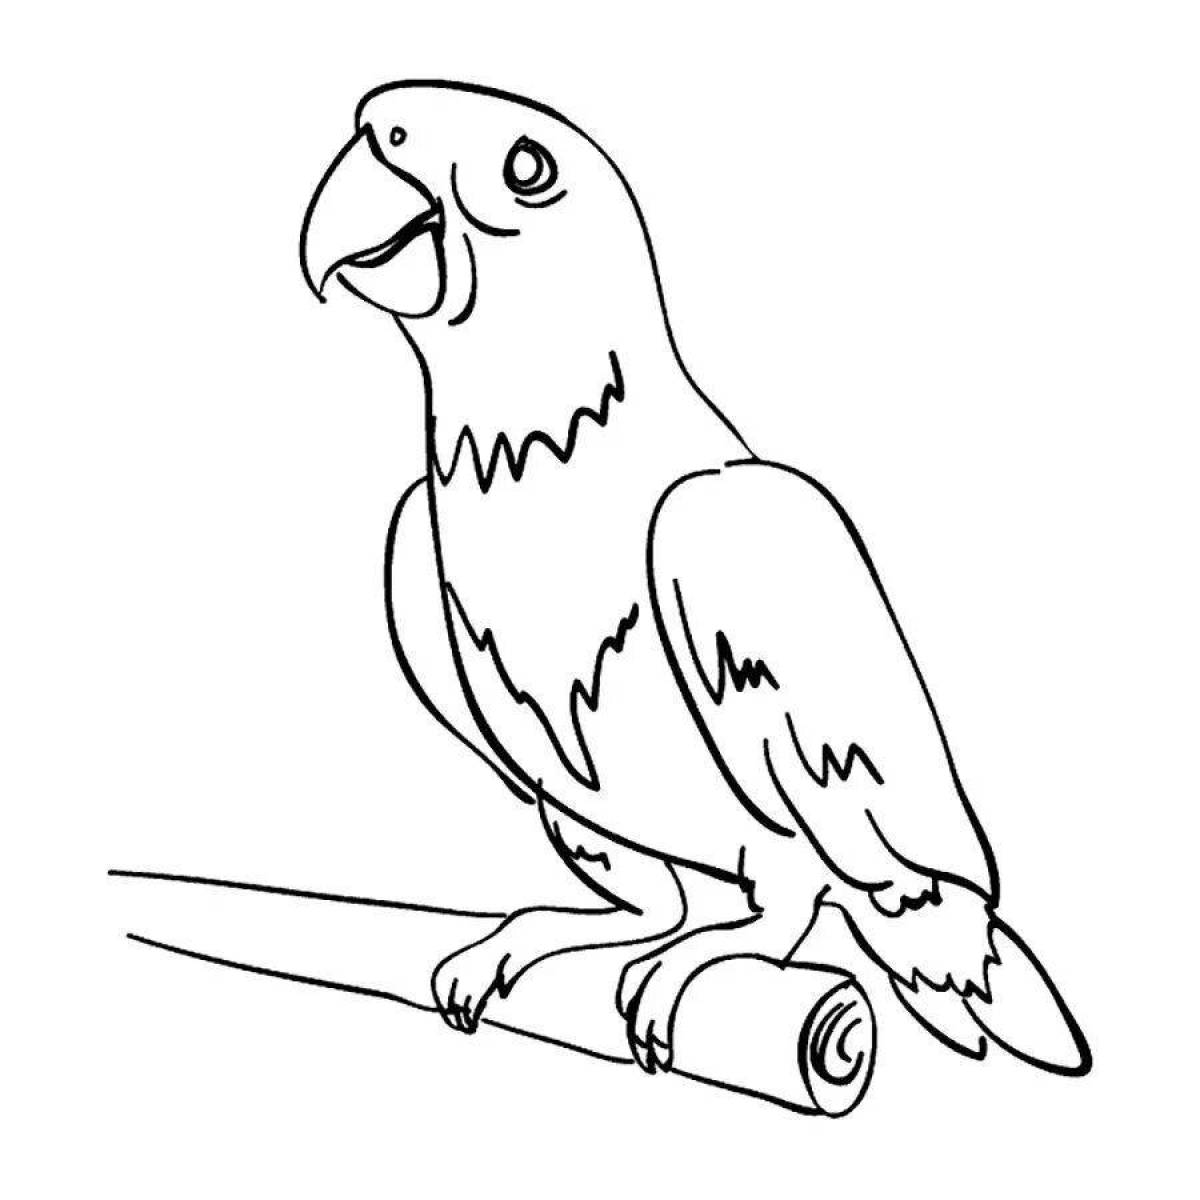 Playful drawing of a parrot for children